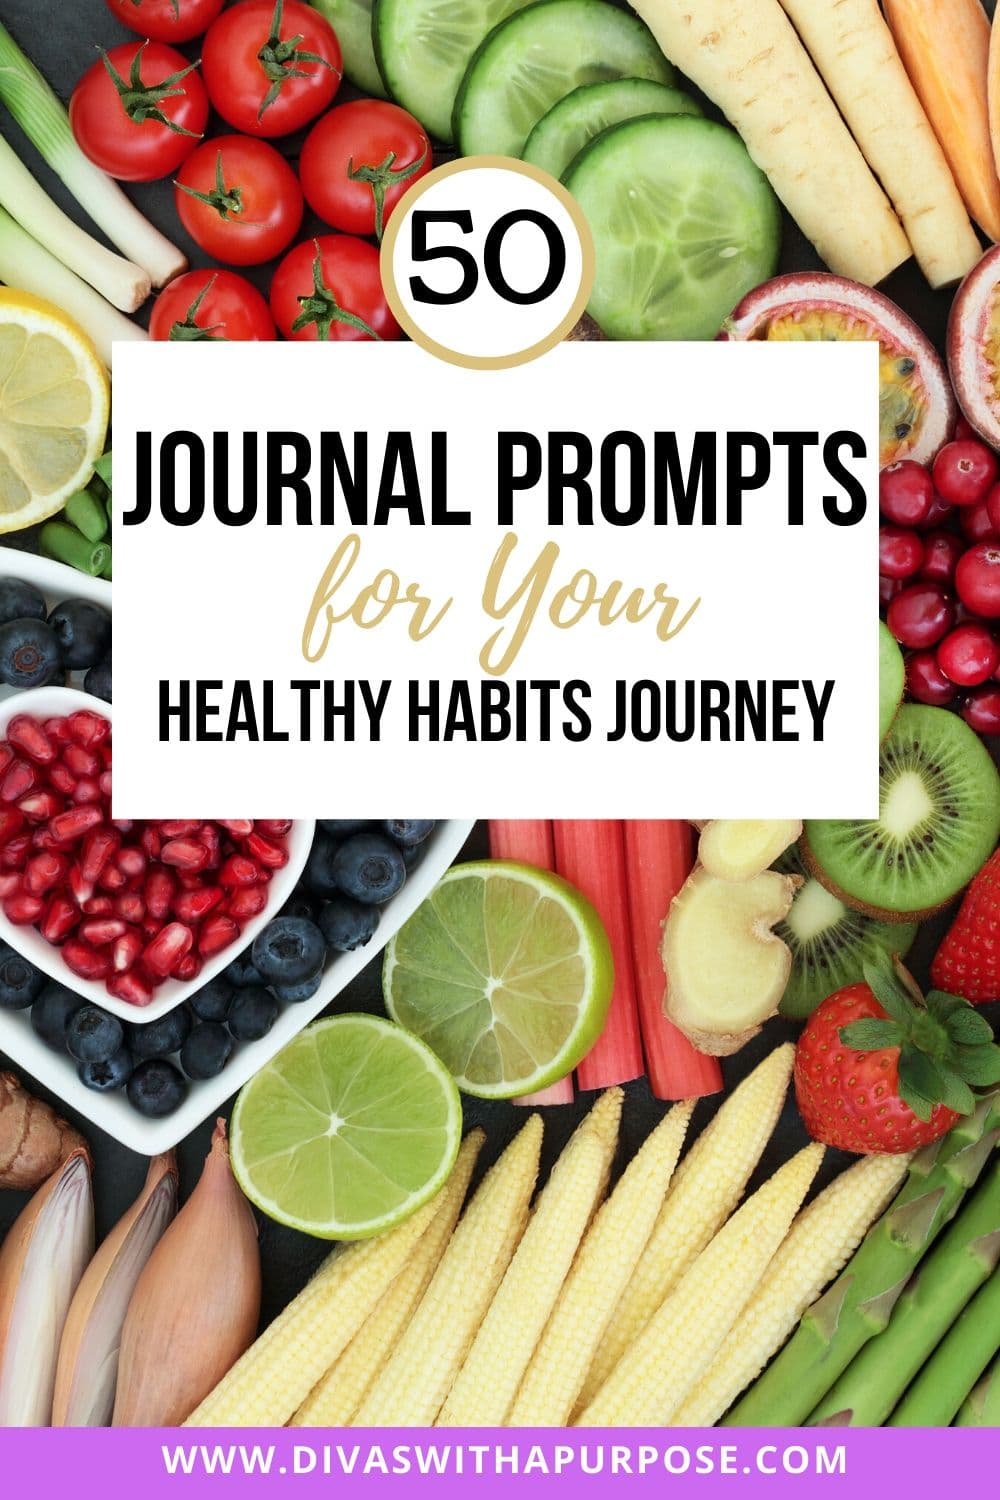 Adding journaling to your healthy habits routine helps tie in what you are doing to become a healthier you. Here are journal prompts to get you started. | #healthyhabits #journalprompts